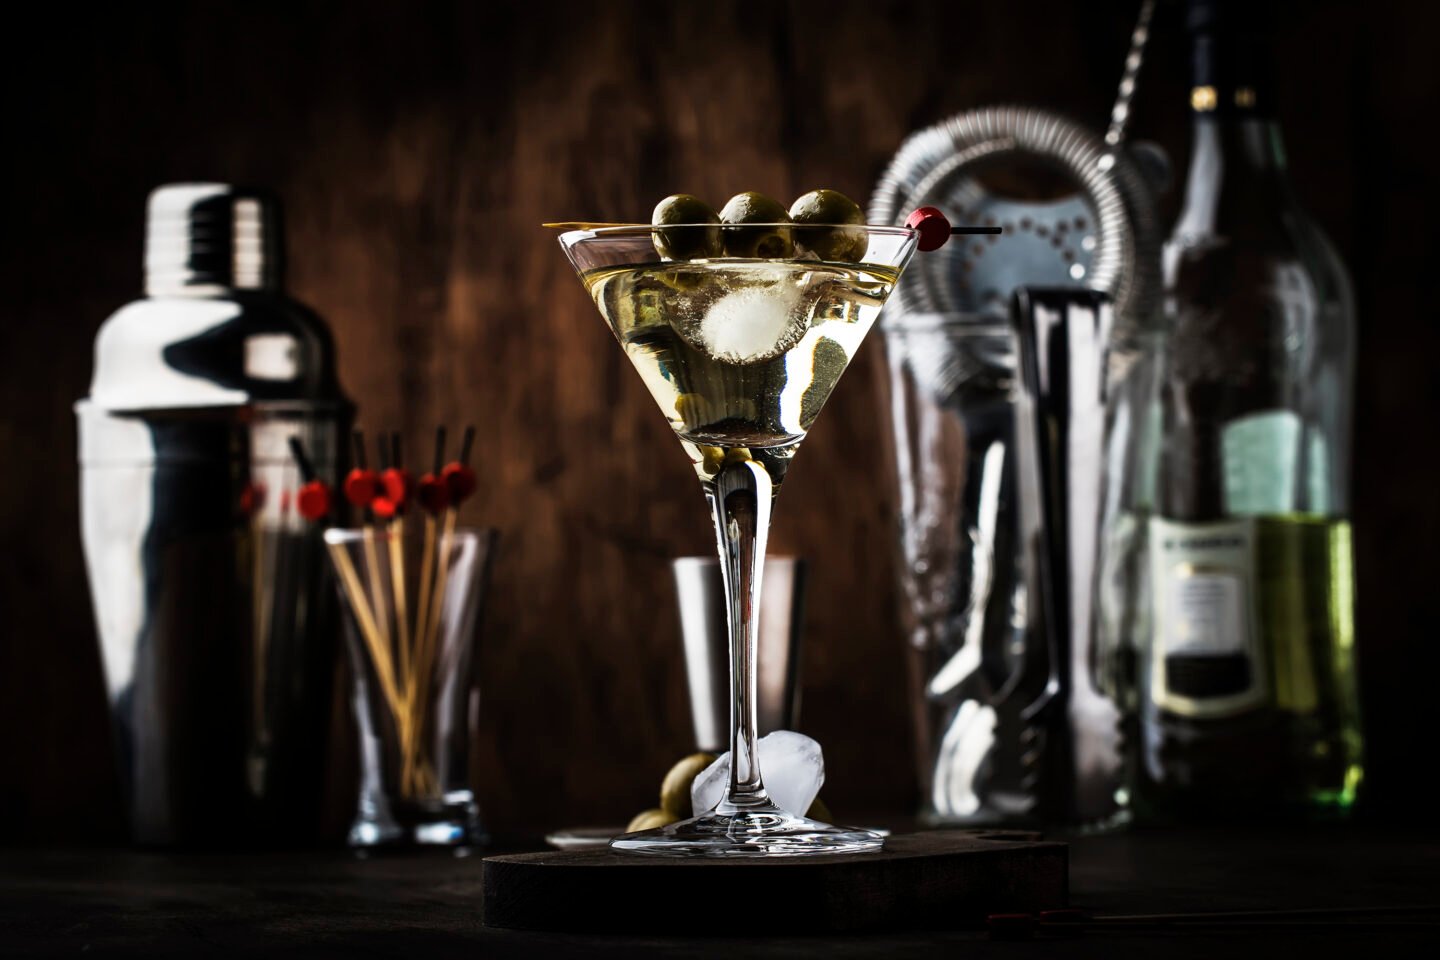 Martini vodka cocktail, with dry vermouth, vodka and green olive